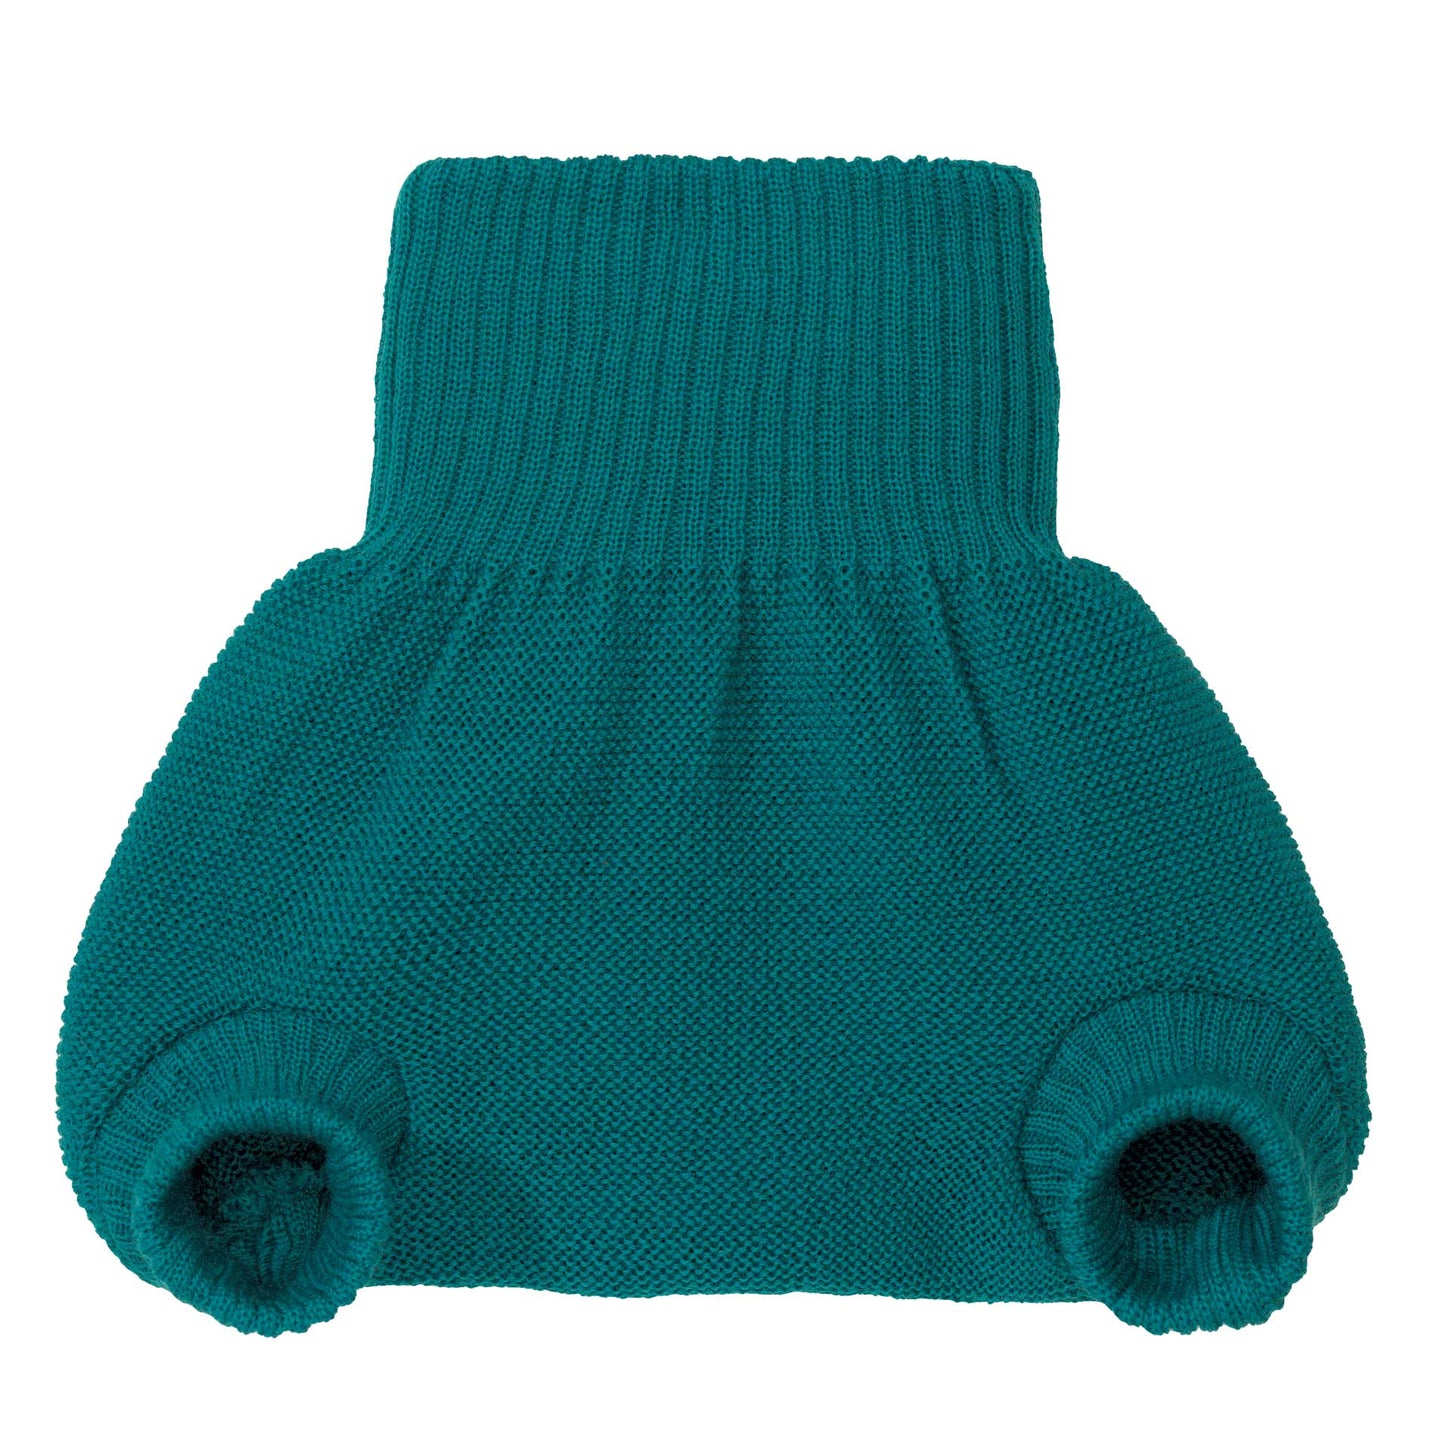 Wool Nappy Cover | 6-12 months (74/80)